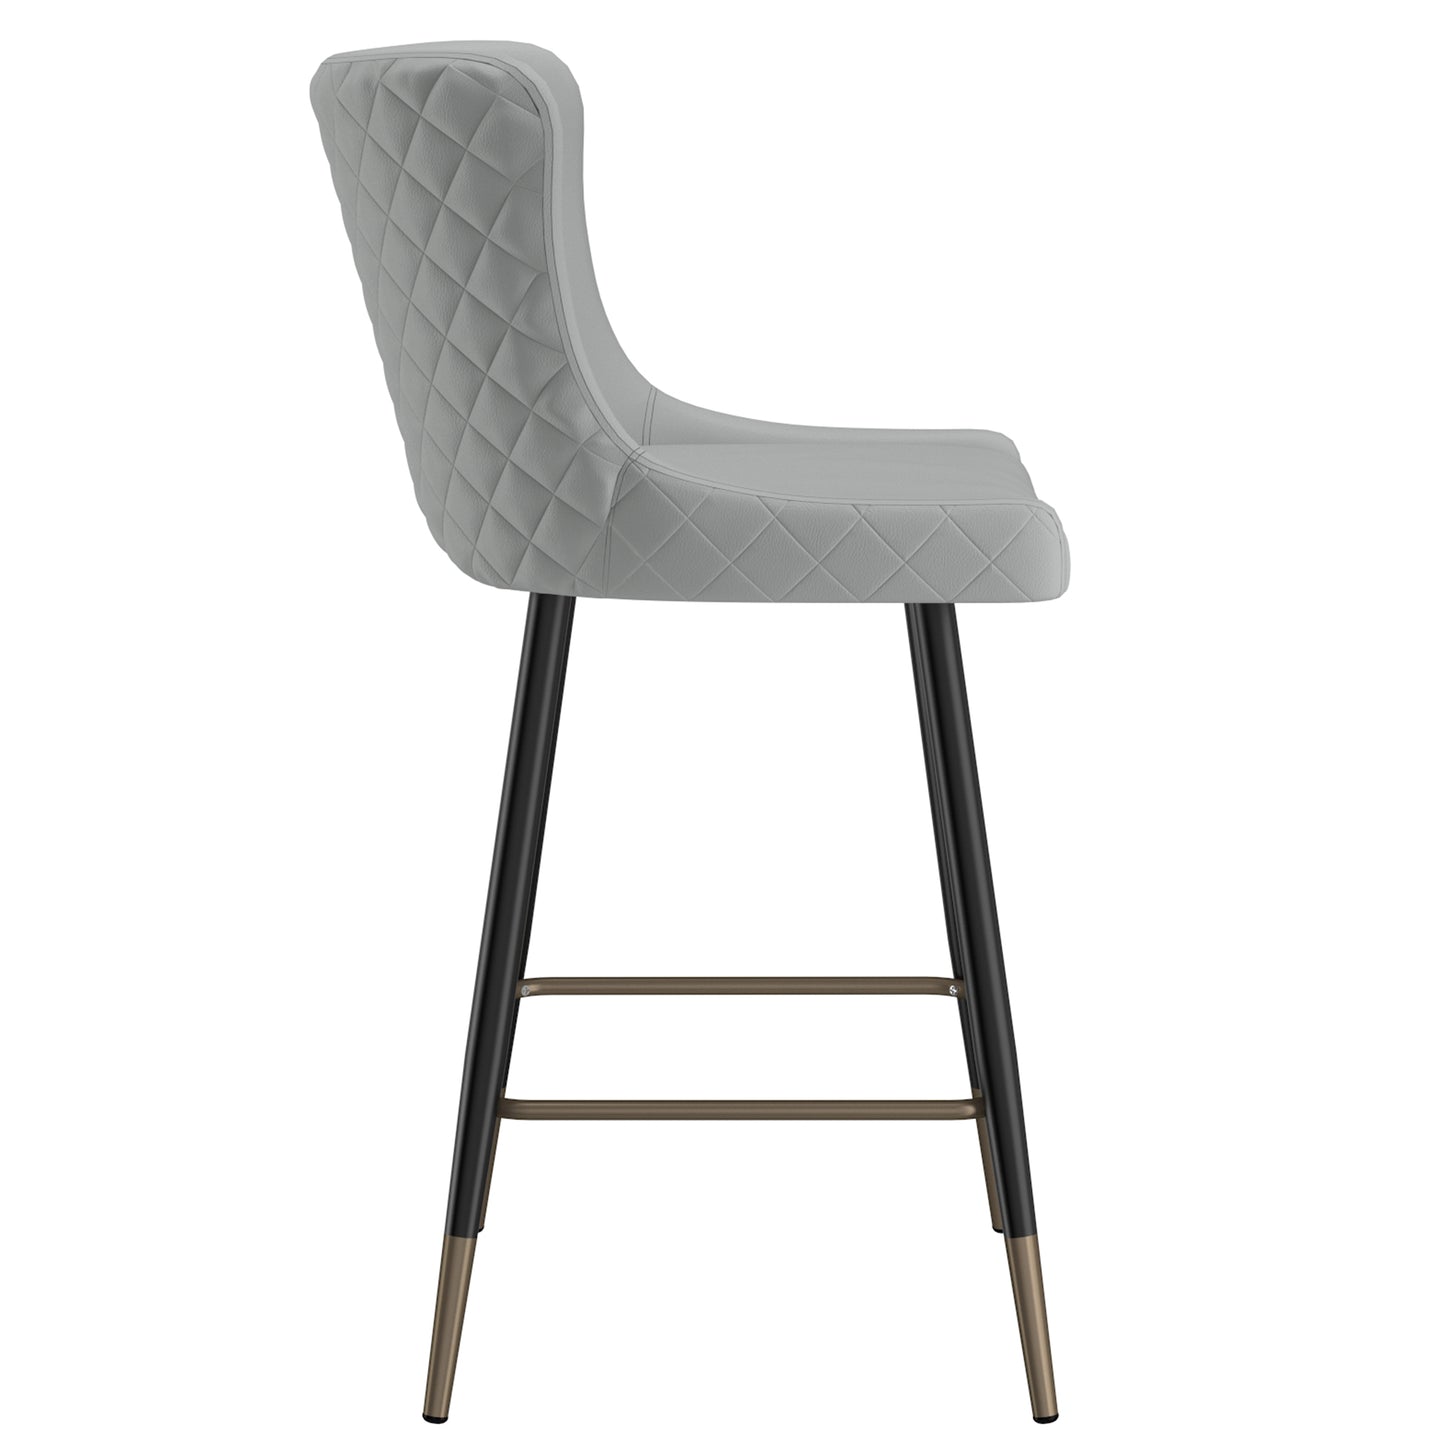 (XANDER LIGHT GREY- 2 PACK) - LEATHER COUNTER STOOLS